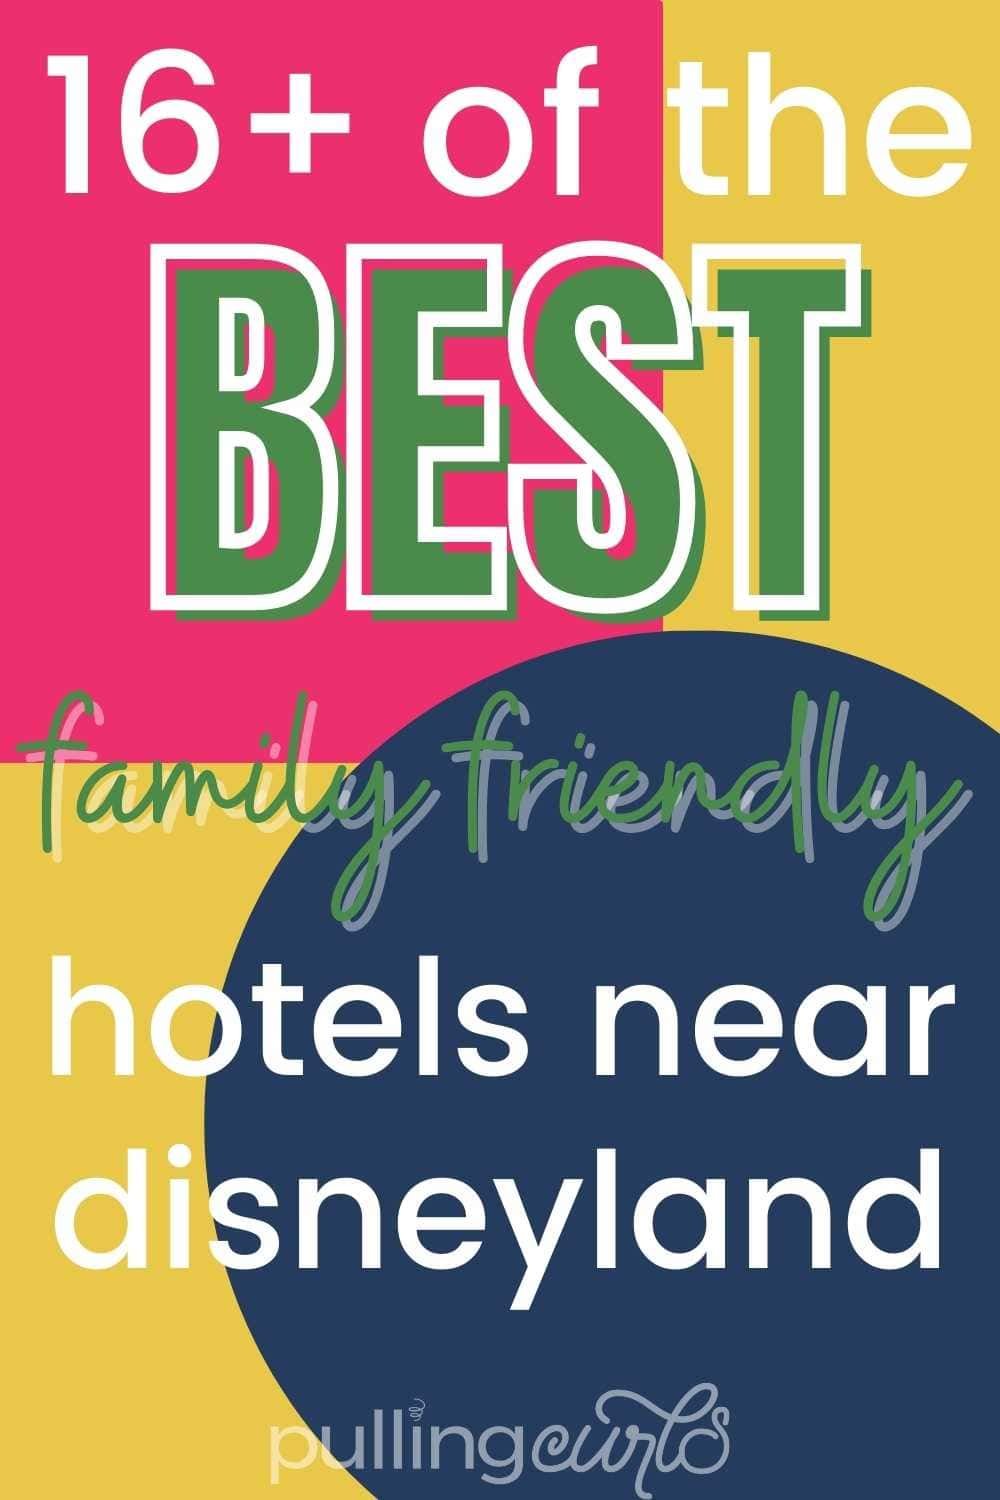 Looking for a Disneyland hotel that has everything you need -- we've got free breakfast, bunk beds, awesome outdoor pools. These best hotels are an awesome pick for your Disneyland vacation! via @pullingcurls